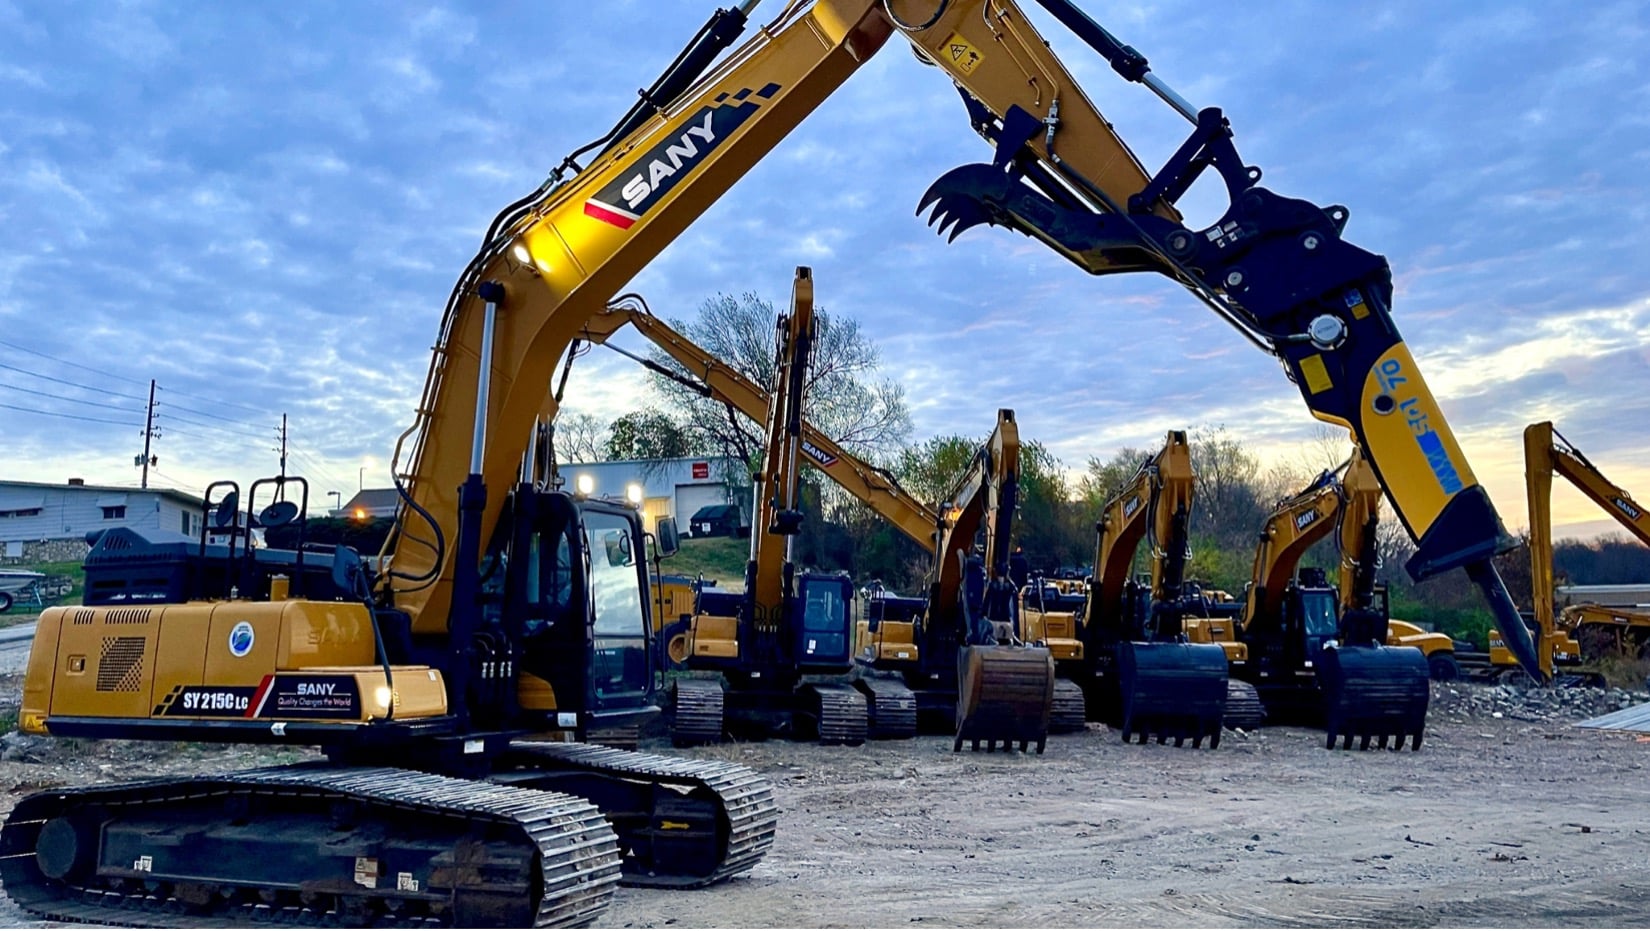 Construction Equipment Dealer in Springfield: The 17 Best Reasons to Visit